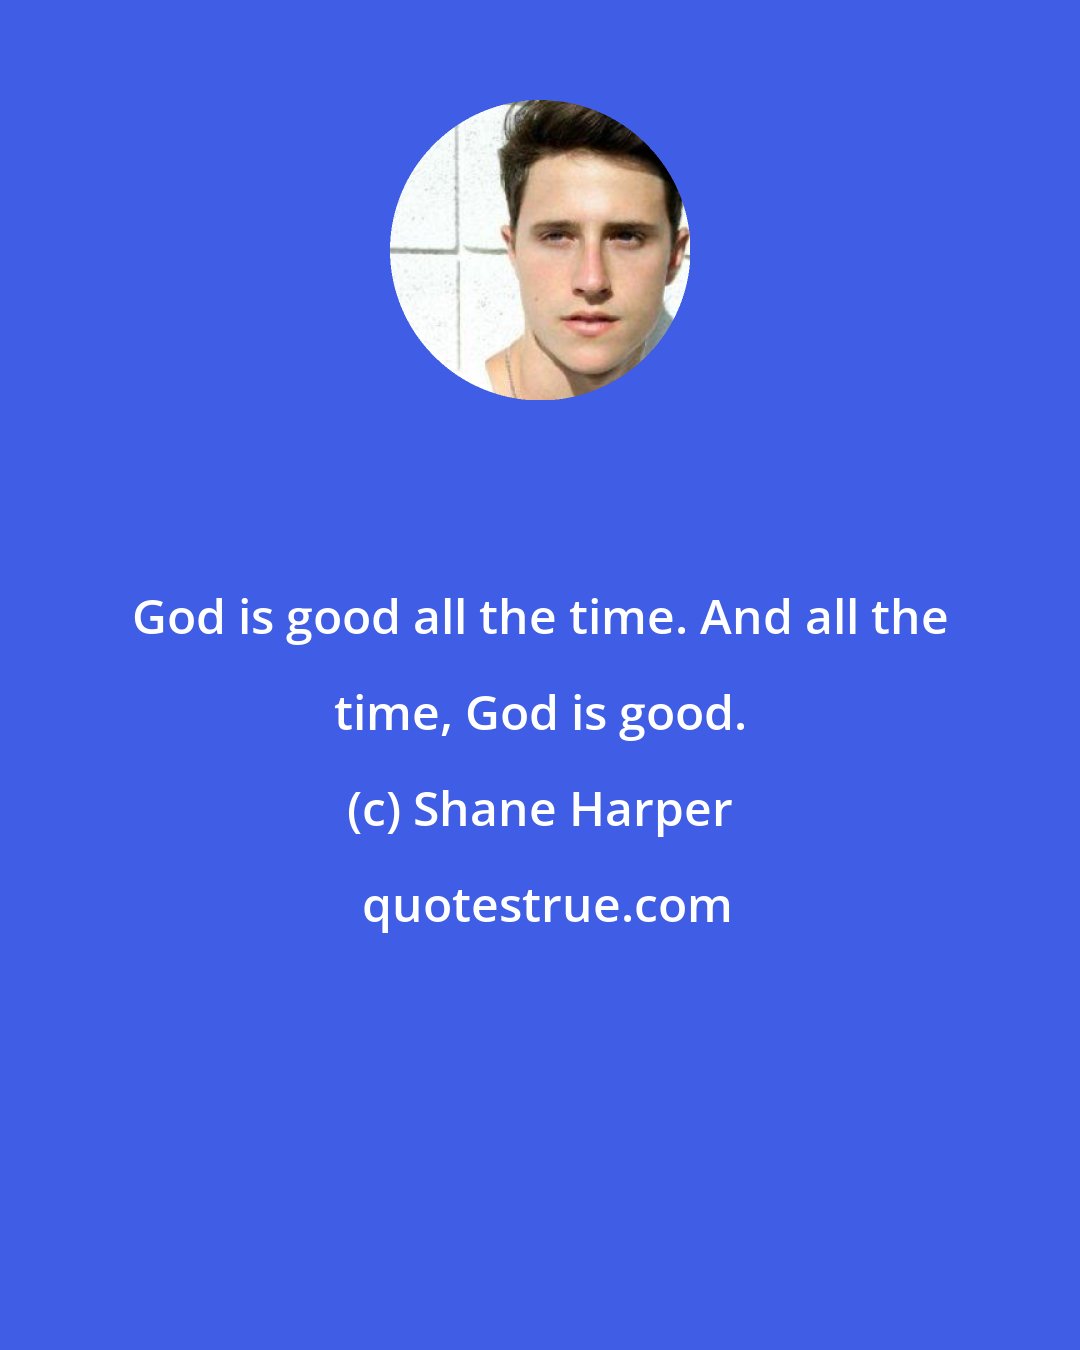 Shane Harper: God is good all the time. And all the time, God is good.